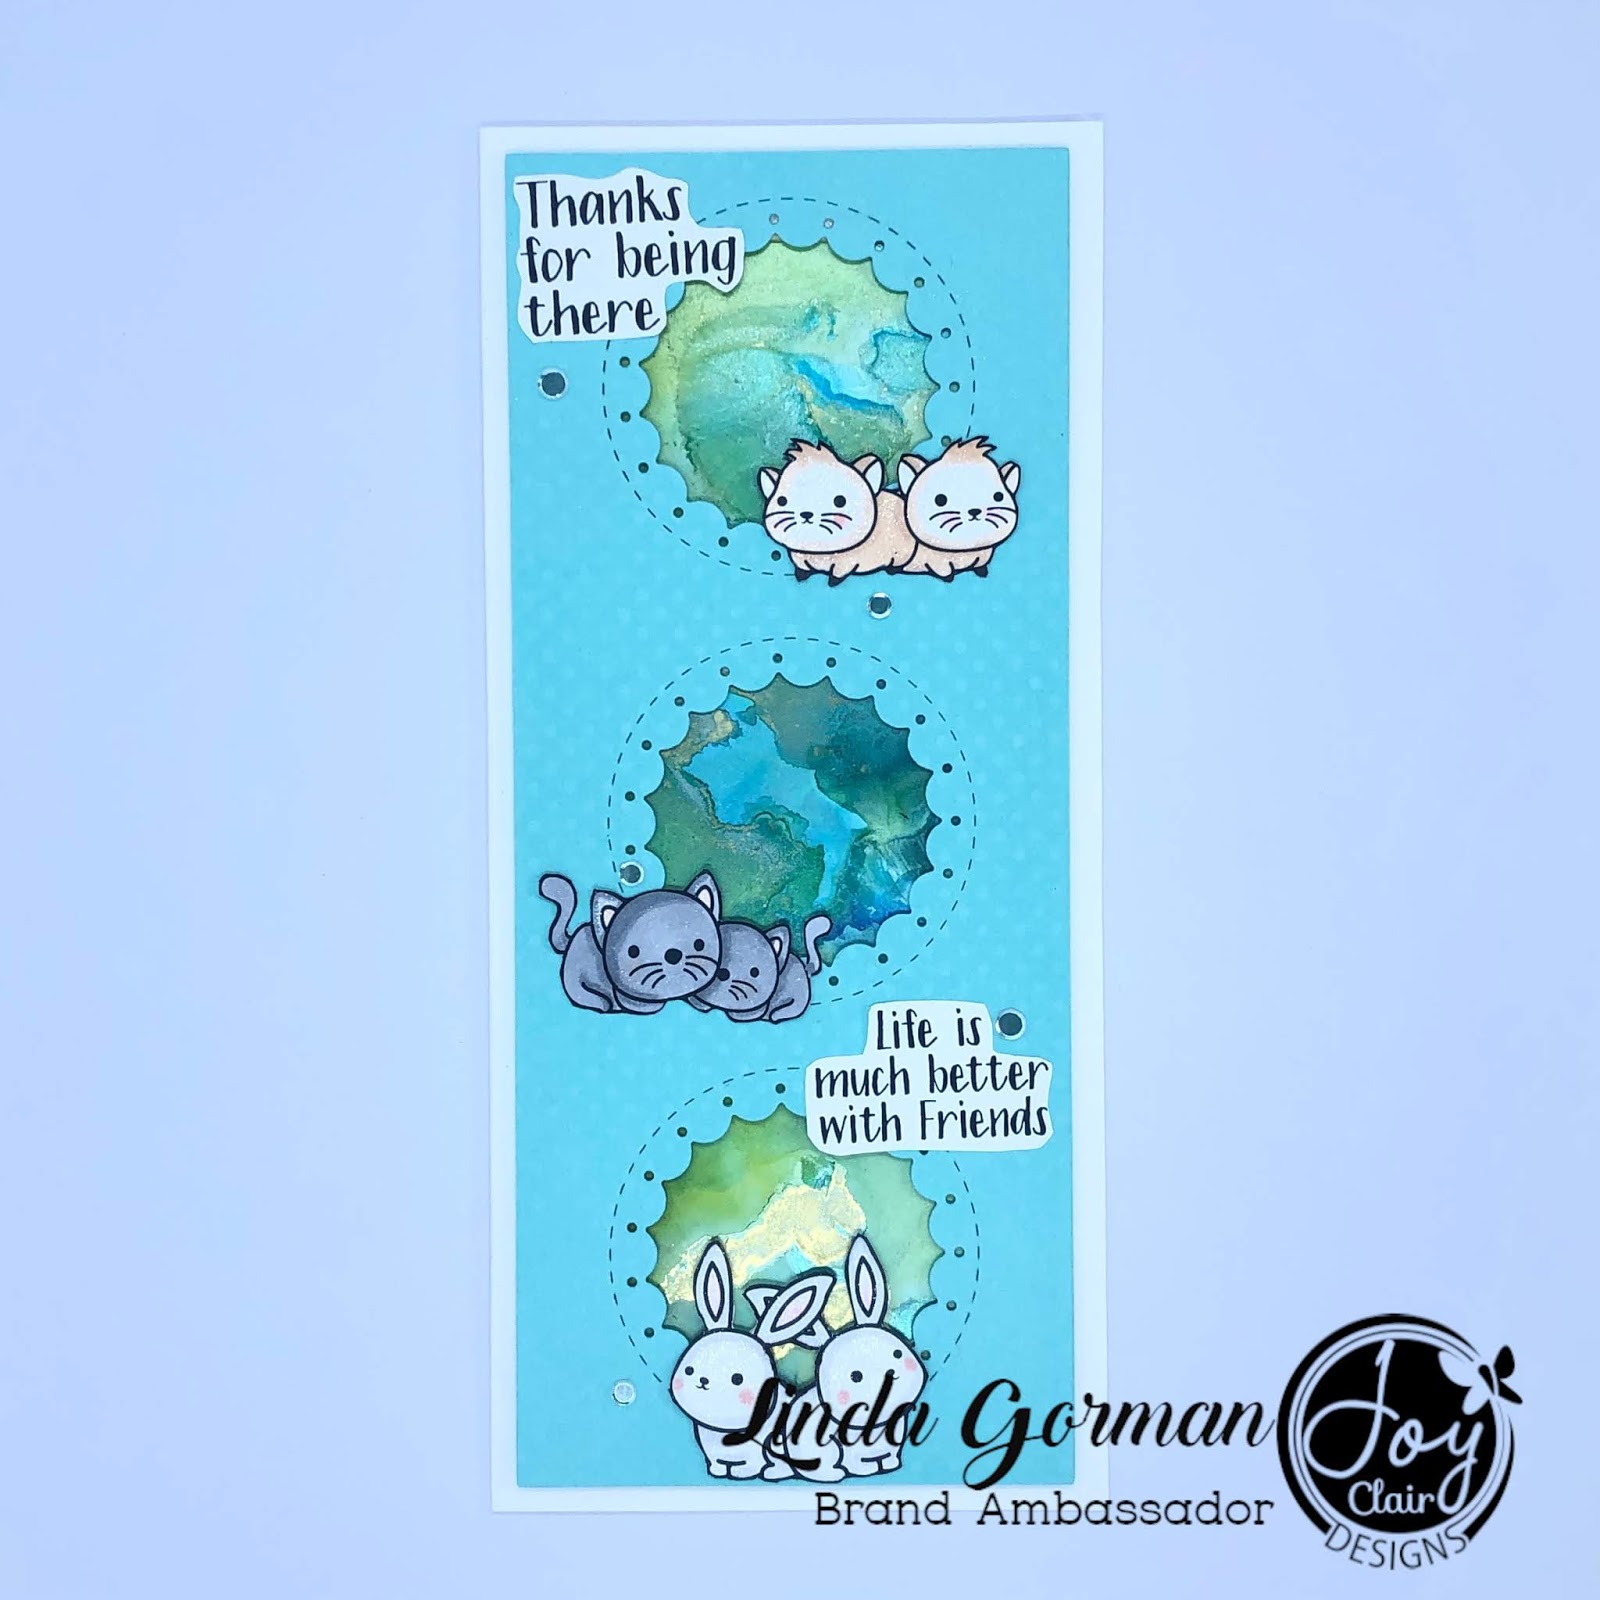 slimline stamped card with cute critters and friendship sentiments.